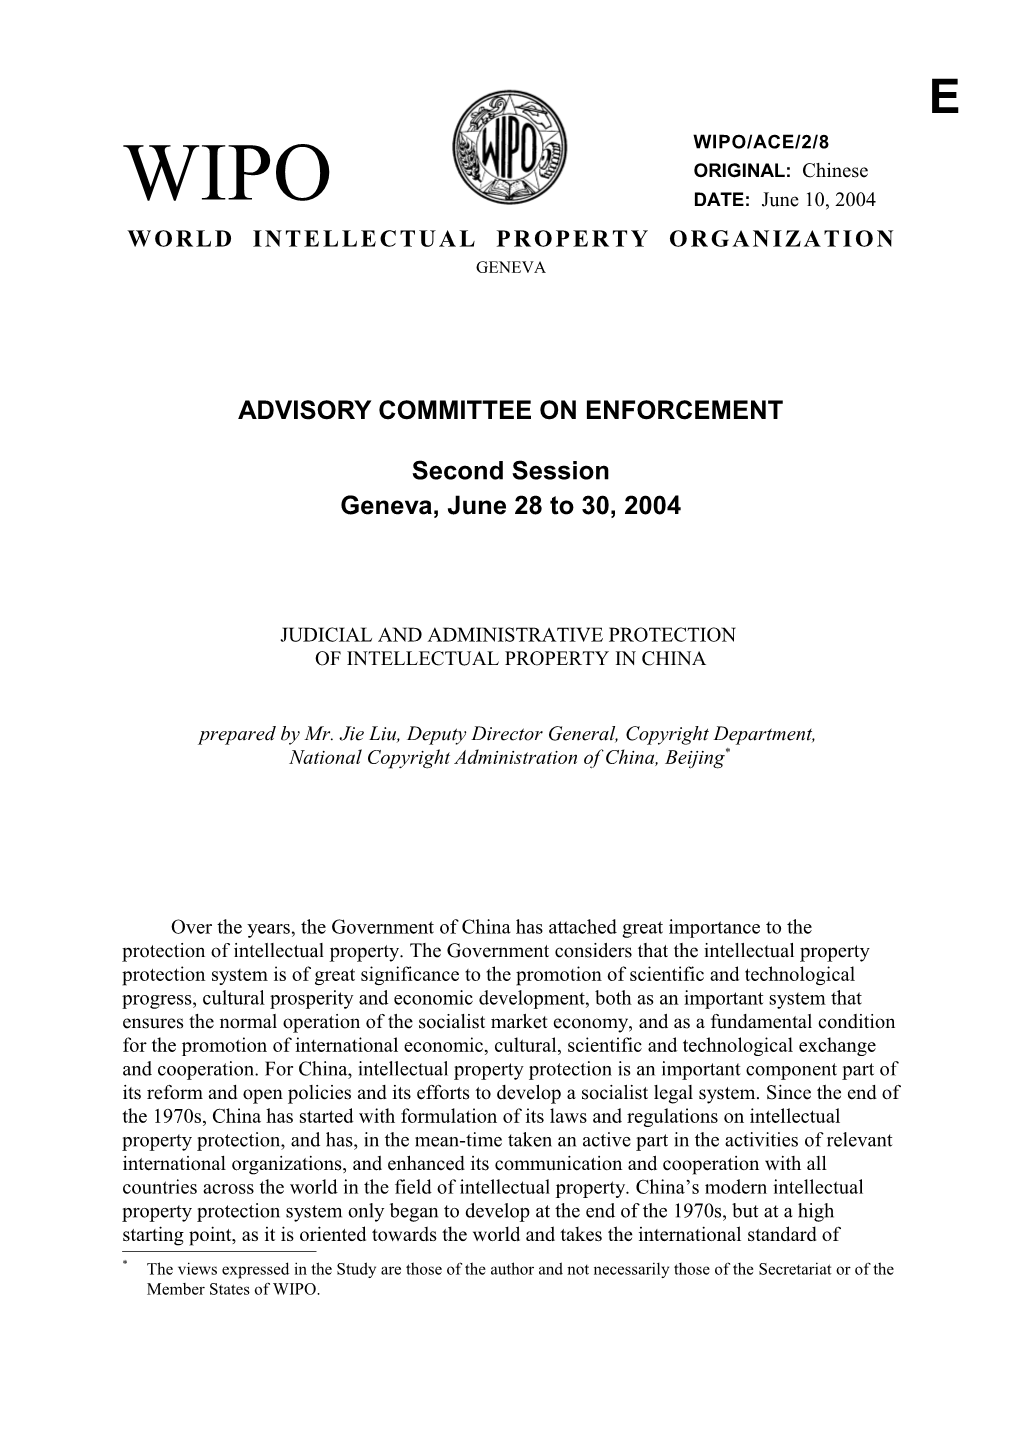 WIPO/ACE/2/8: Judicial and Administrative Protection of Intellectual Property in China